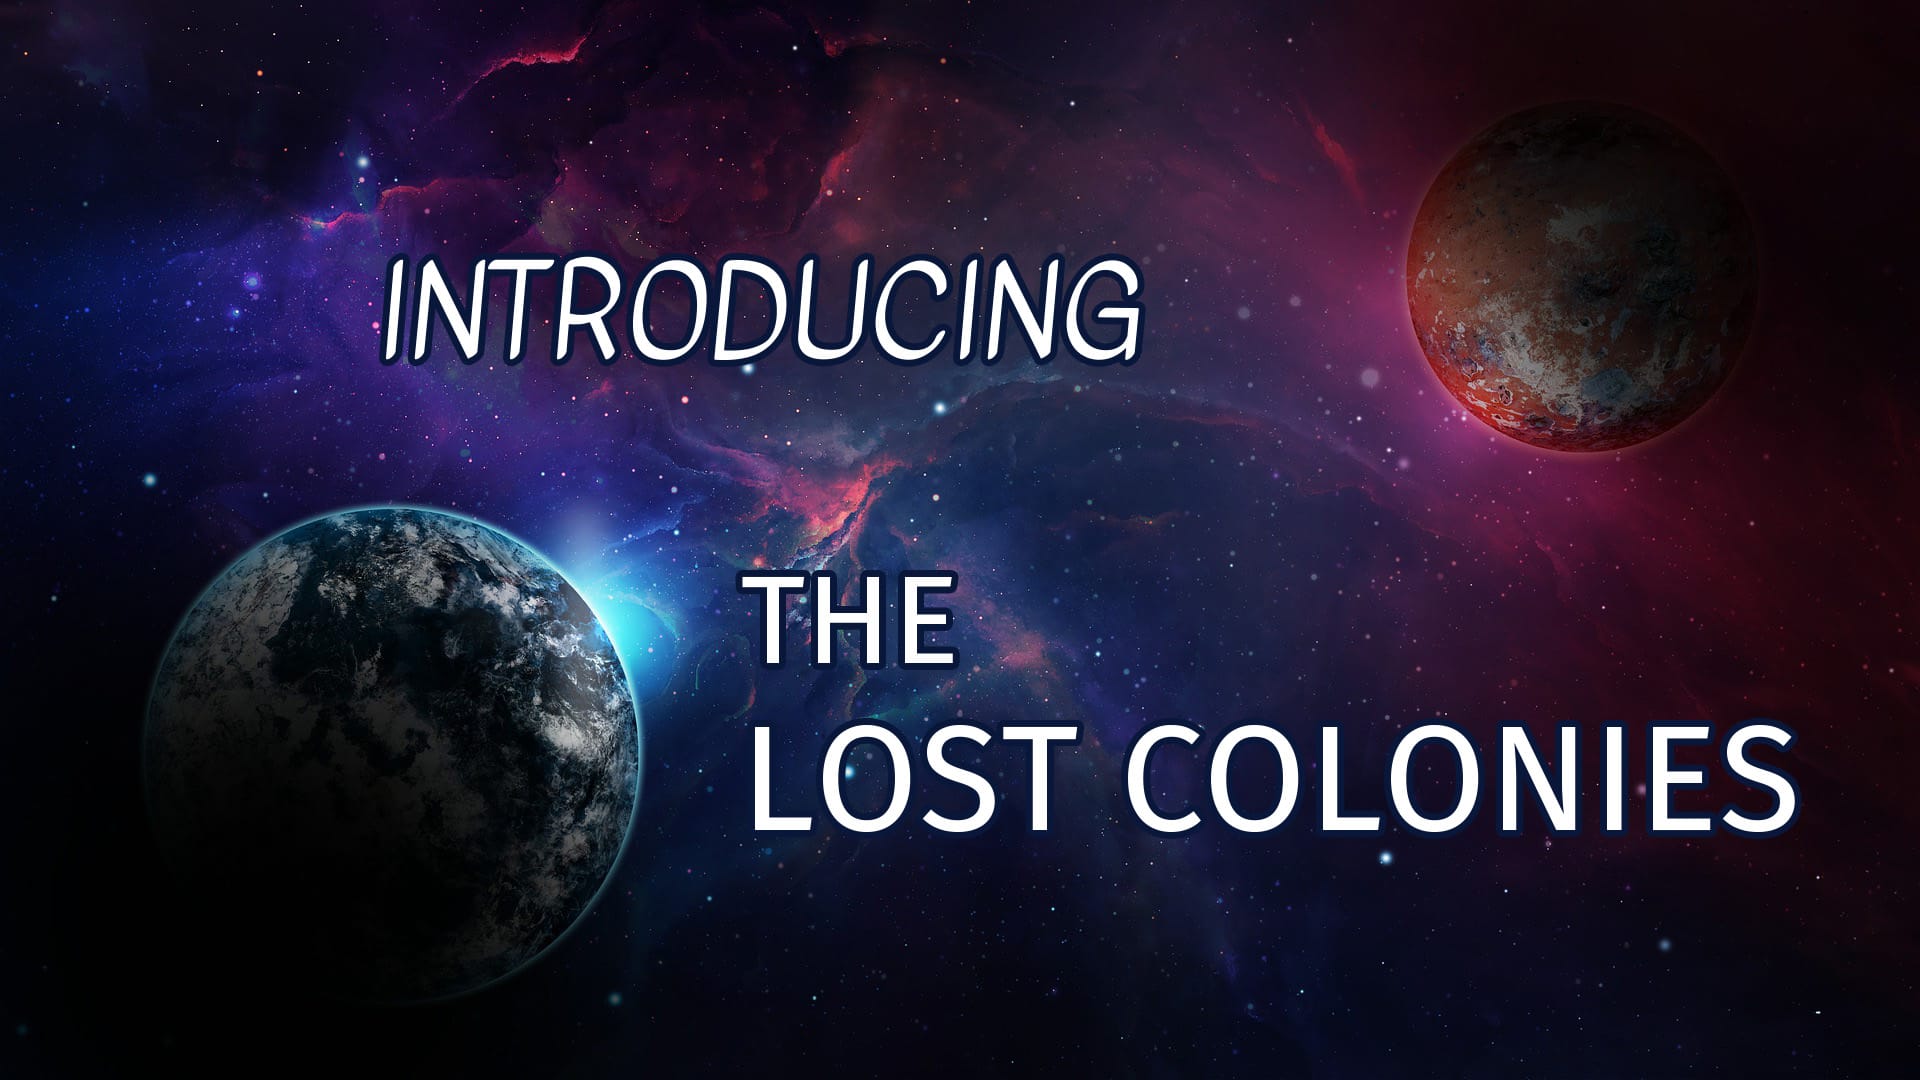 "Introducing the Lost Colonies". Two planets with dark space background.